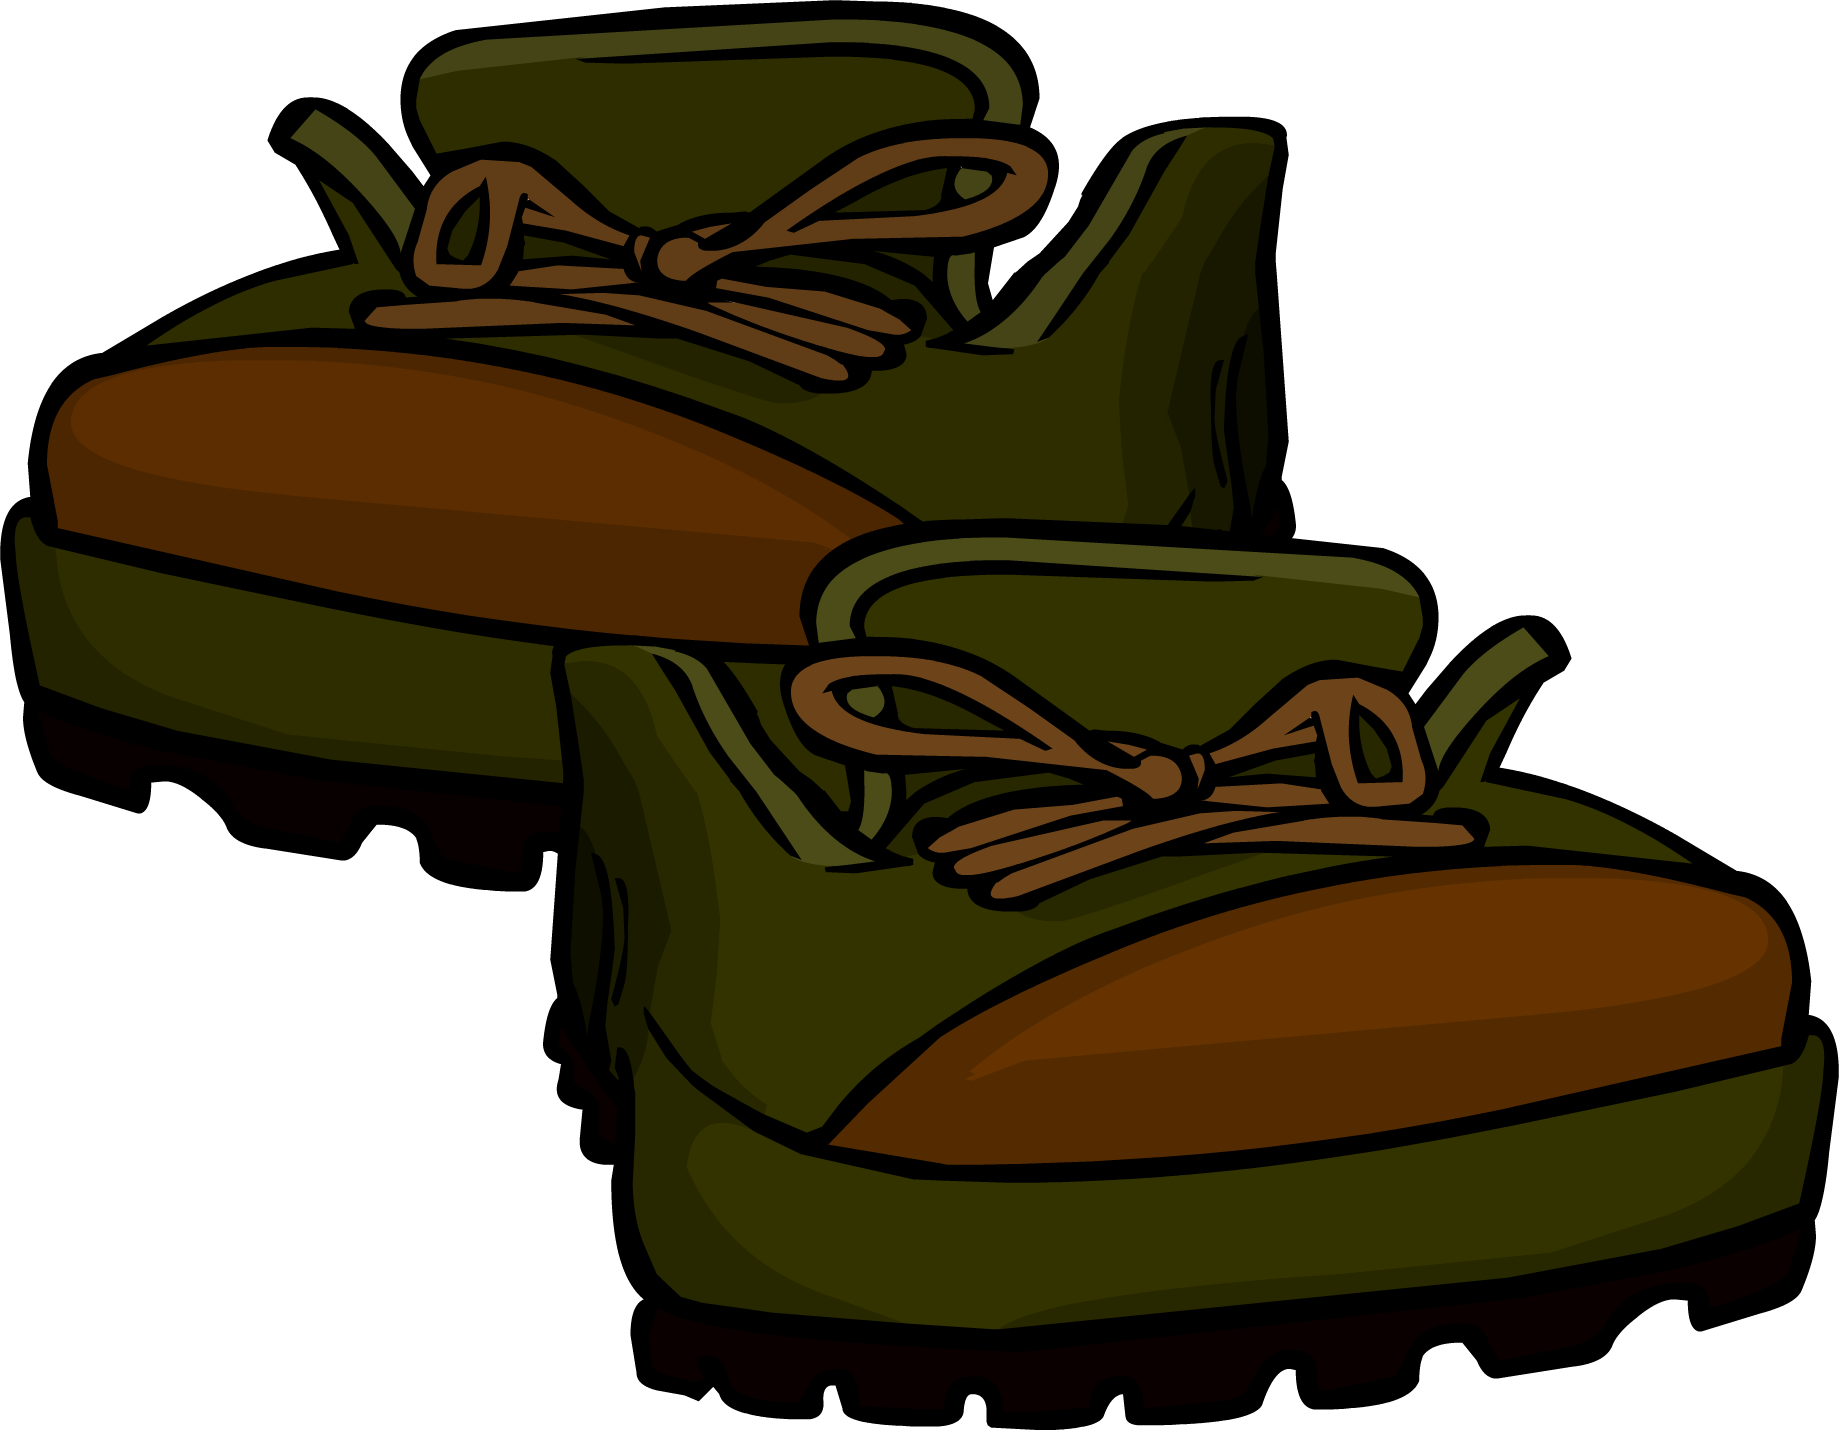 Hiking Boots Illustration PNG